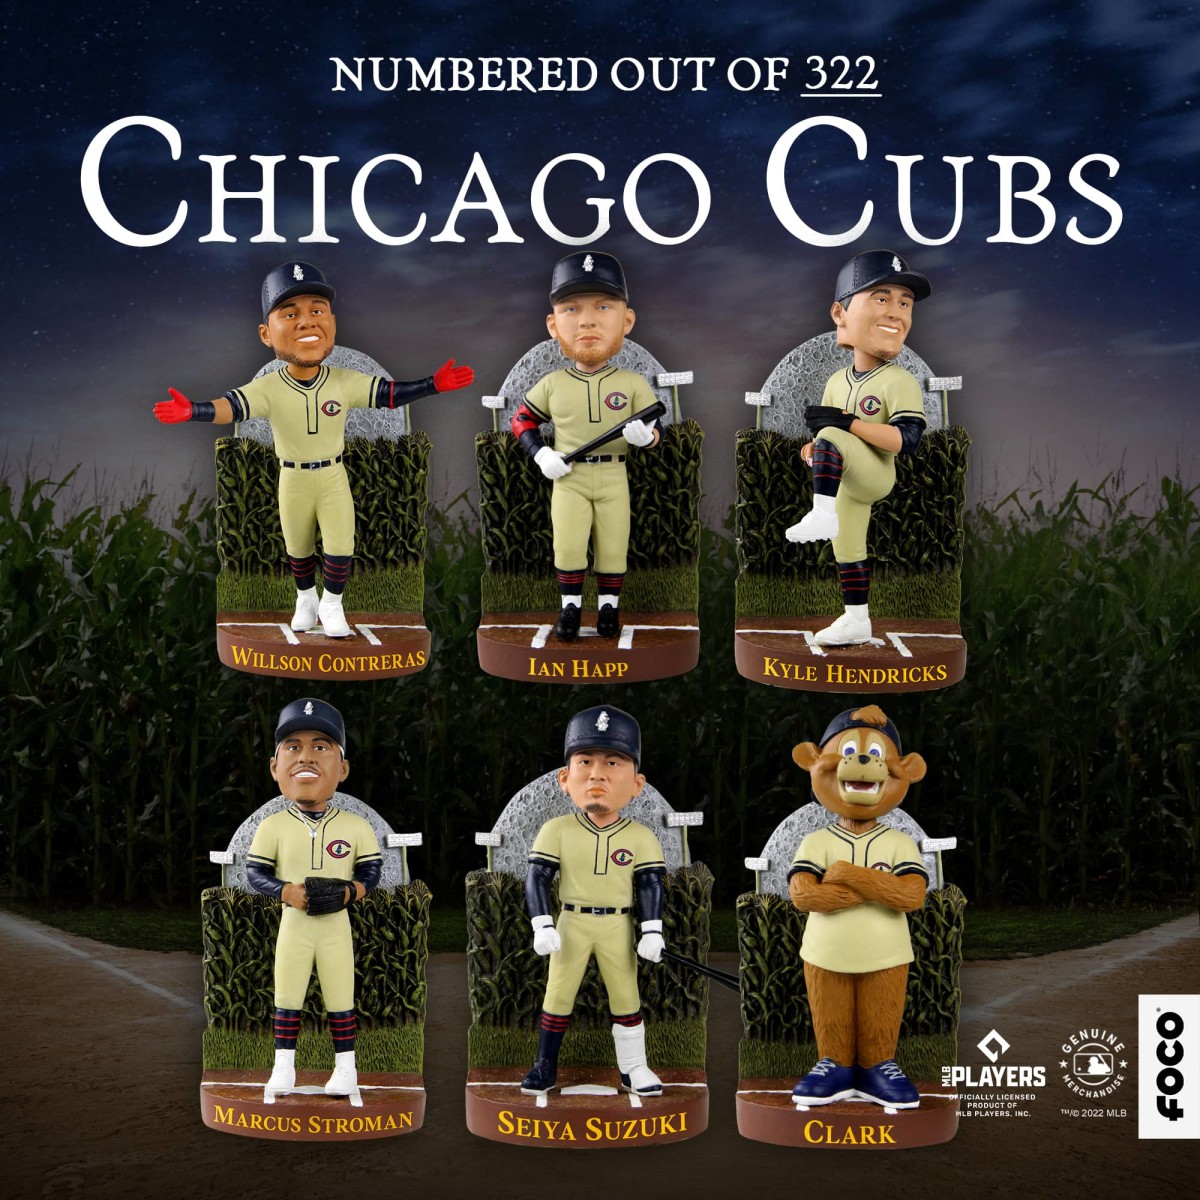 FOCO USA Releases Exclusive Chicago Cubs 'Field of Dreams